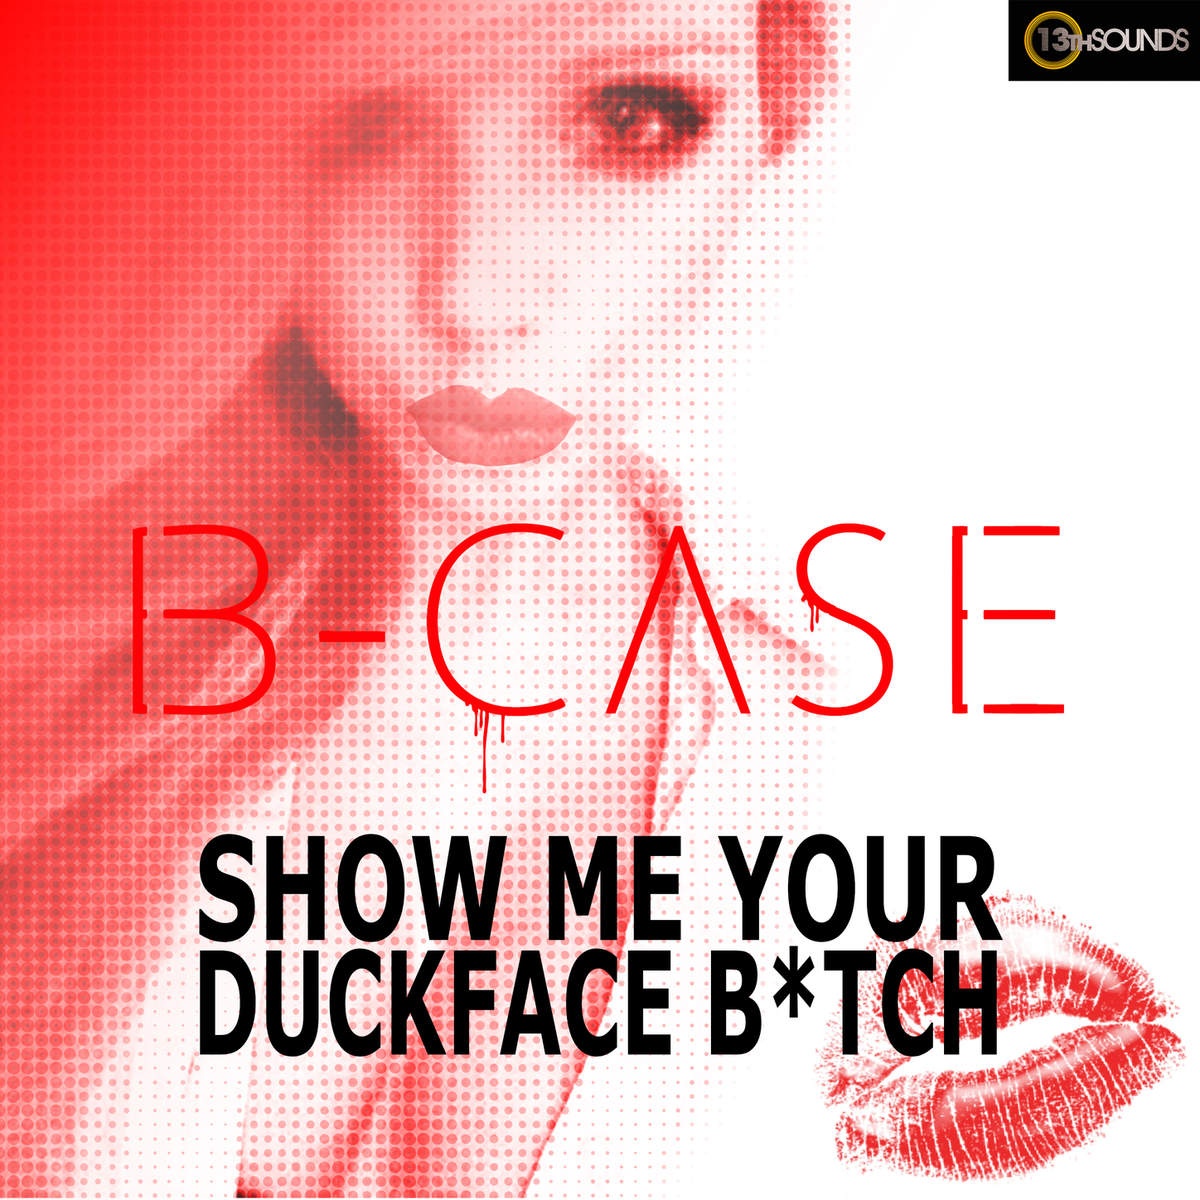 Show Me Your Duckface Bitch